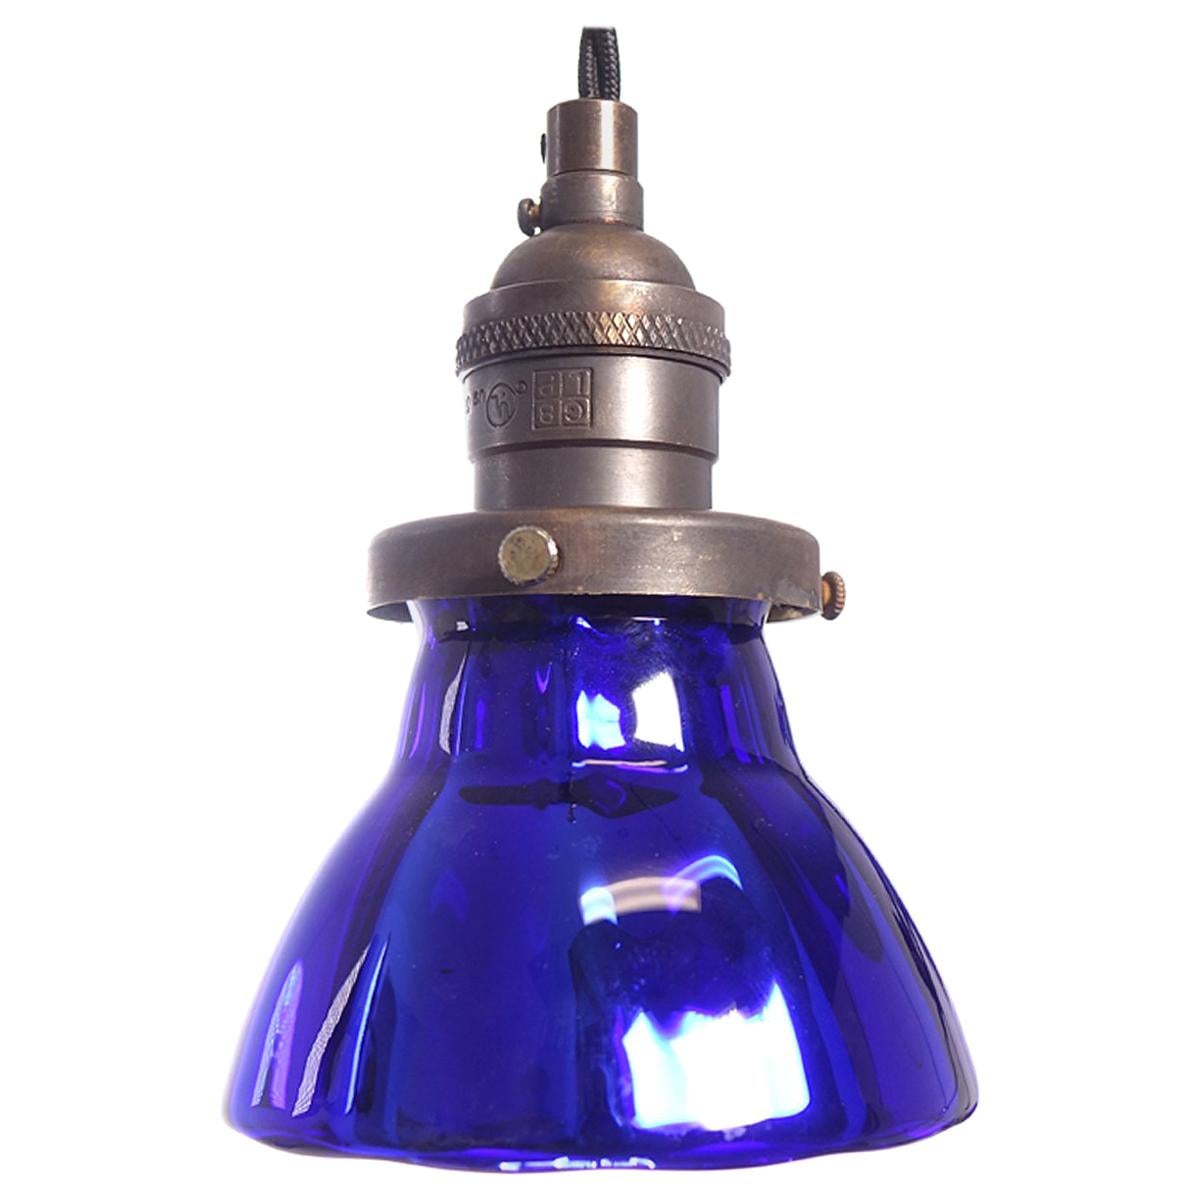 These deep blue pendants are small but striking. They are hollow hand blown blue glass that is mirrored inside. It has a subtle panelled shape that nicely catches the light. These are perfect hung in groups. These lamp shades were a short limited